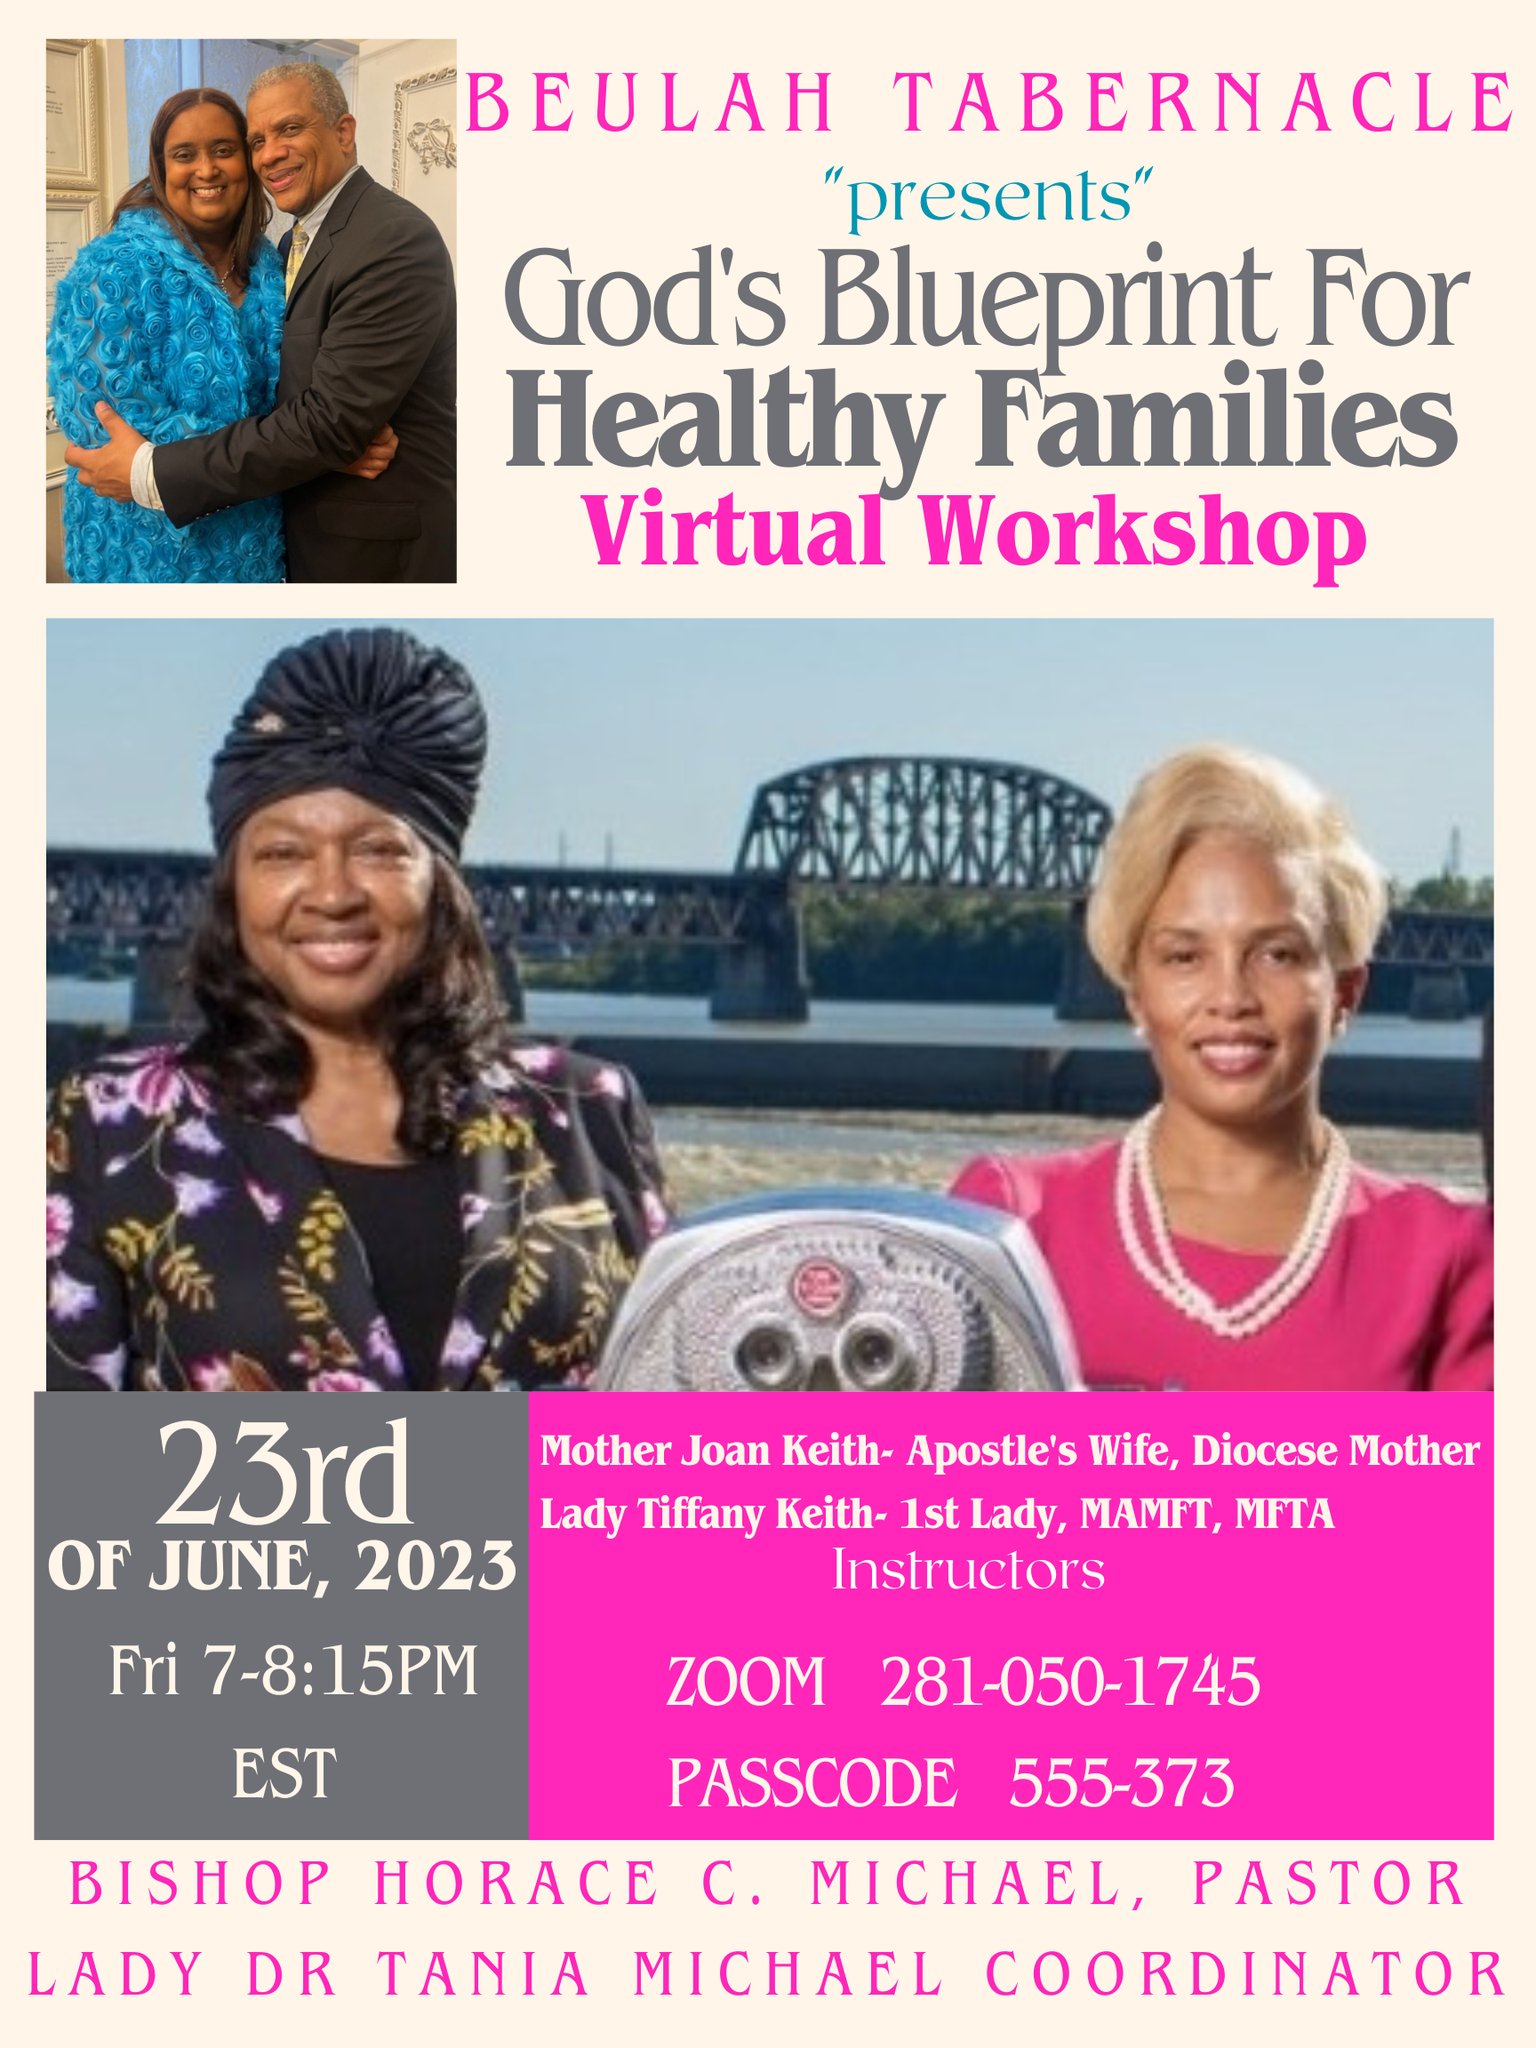 God's Blueprint For Healthy Families @ ZOOM Meeting ID: 281 050 1745 Password: 555373